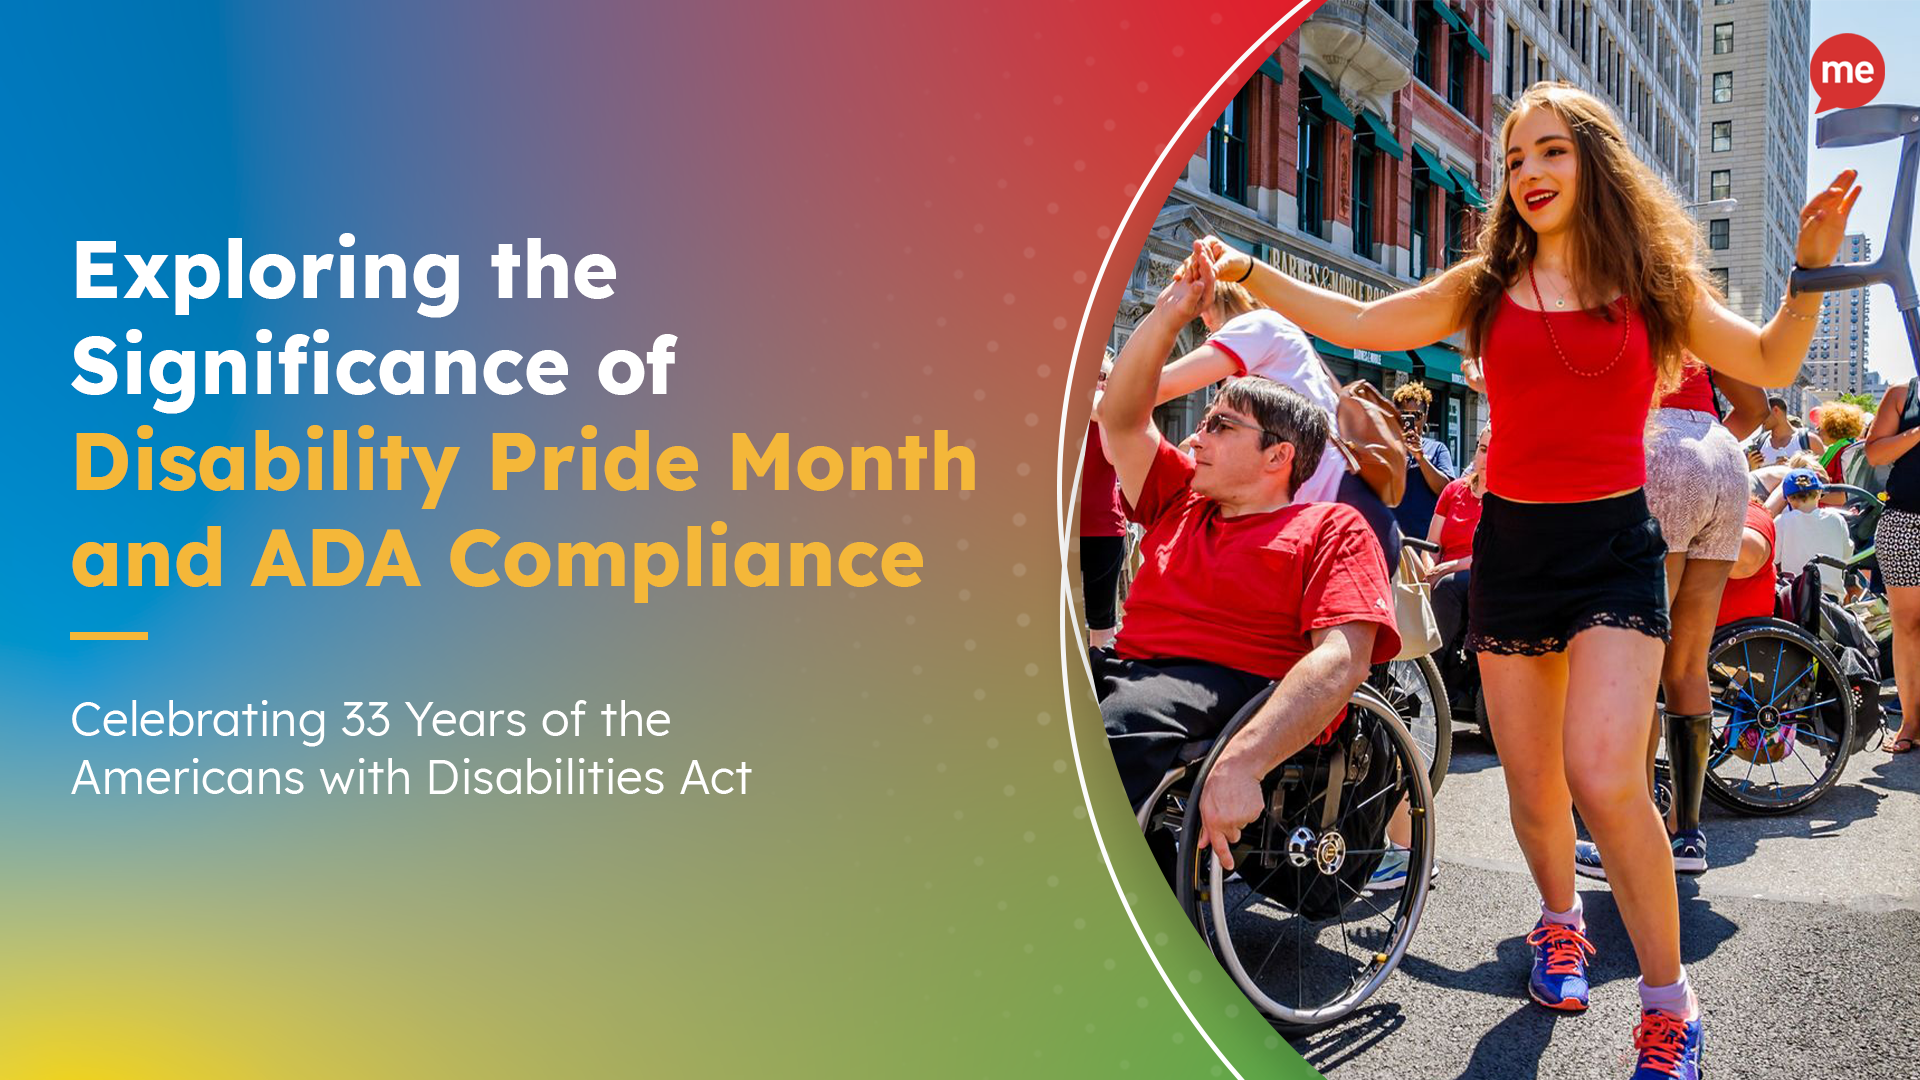 Exploring the Significance of Disability Pride Month and ADA Compliance with an image of a young woman with a cane and a man in a wheelchair at a parade